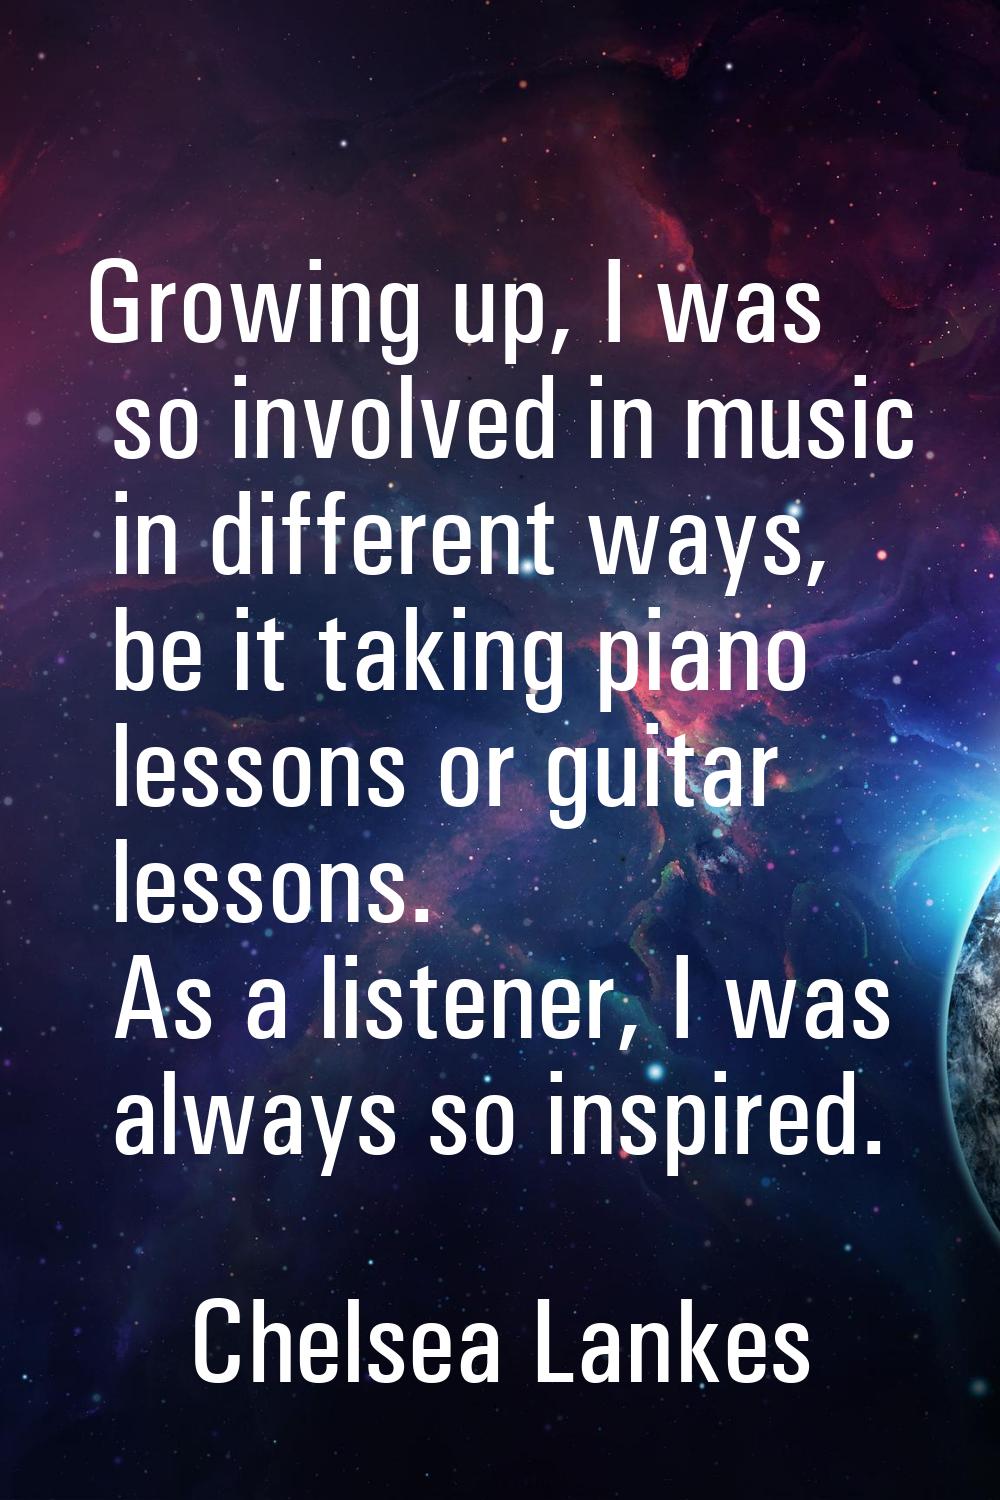 Growing up, I was so involved in music in different ways, be it taking piano lessons or guitar less